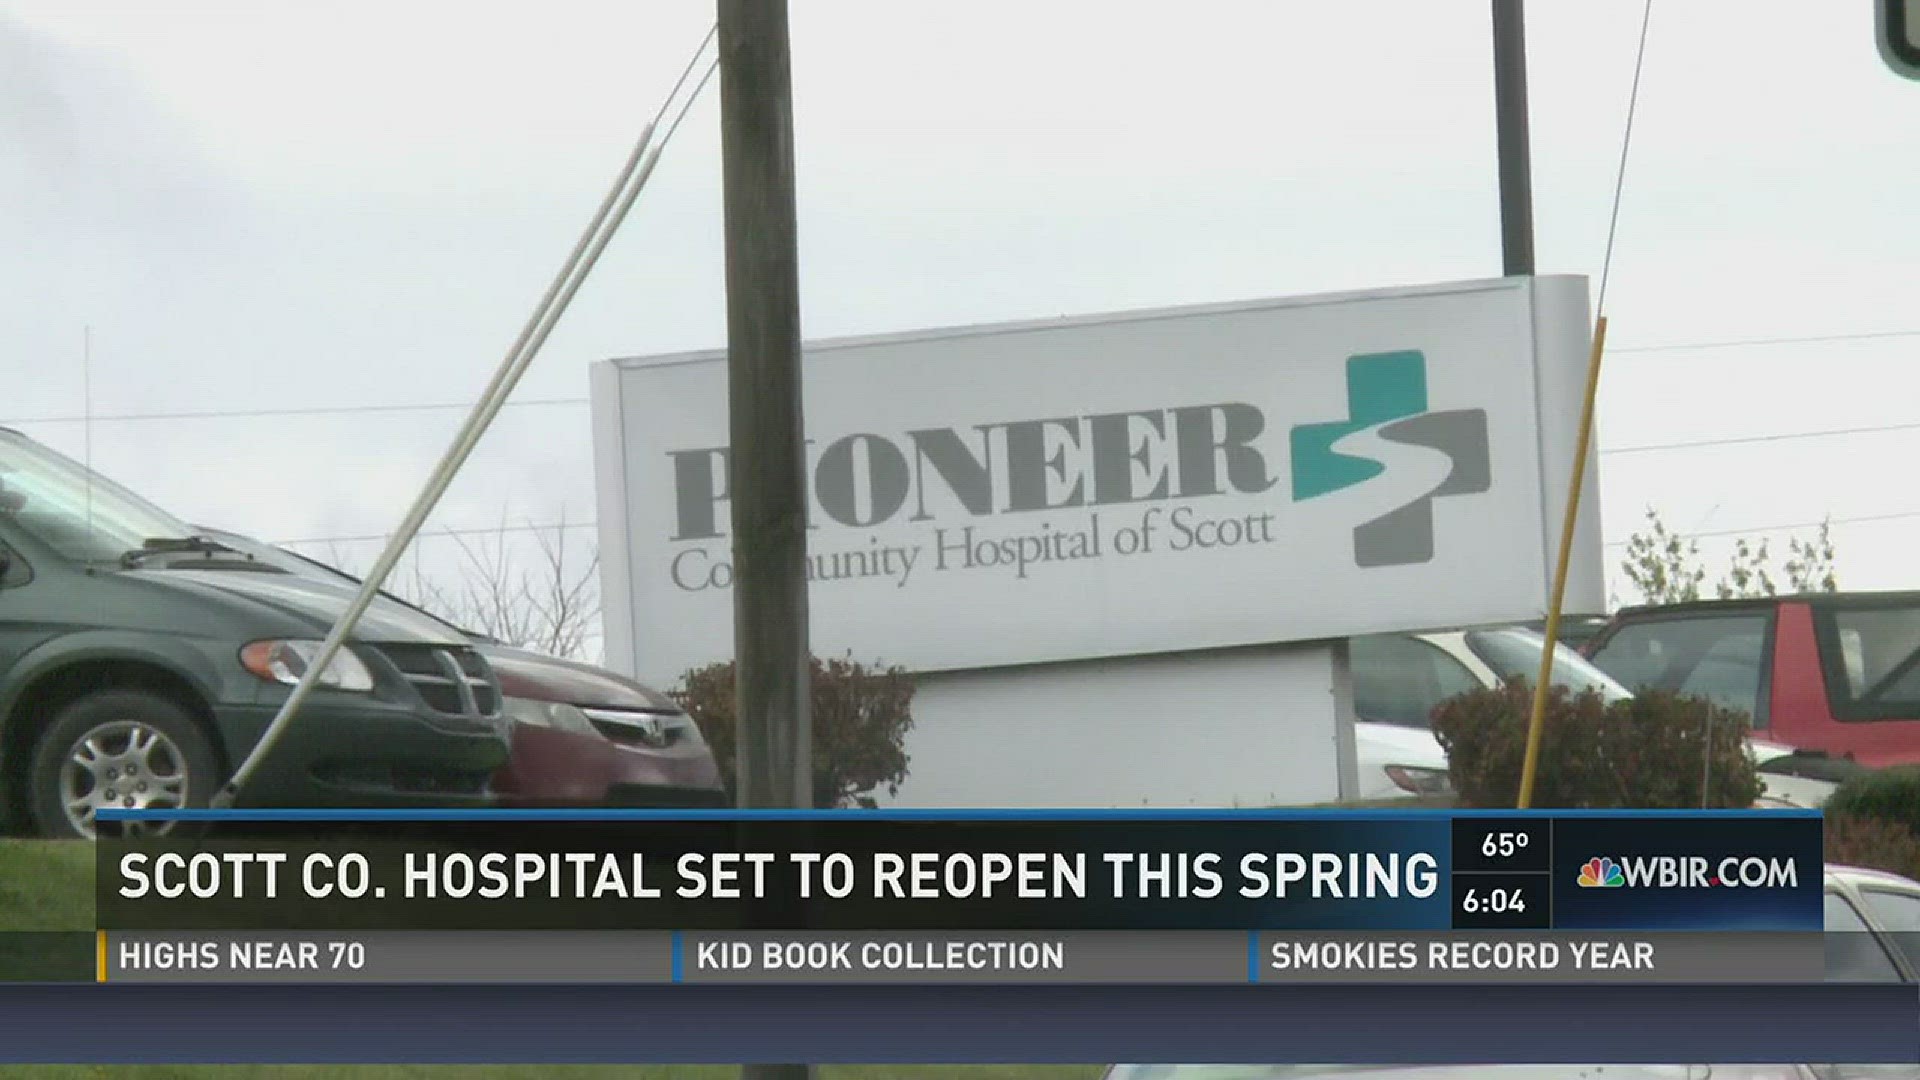 Hospital leaders hope to open Scott county's only hospital in the next few months, as a new owner prepares to take over.